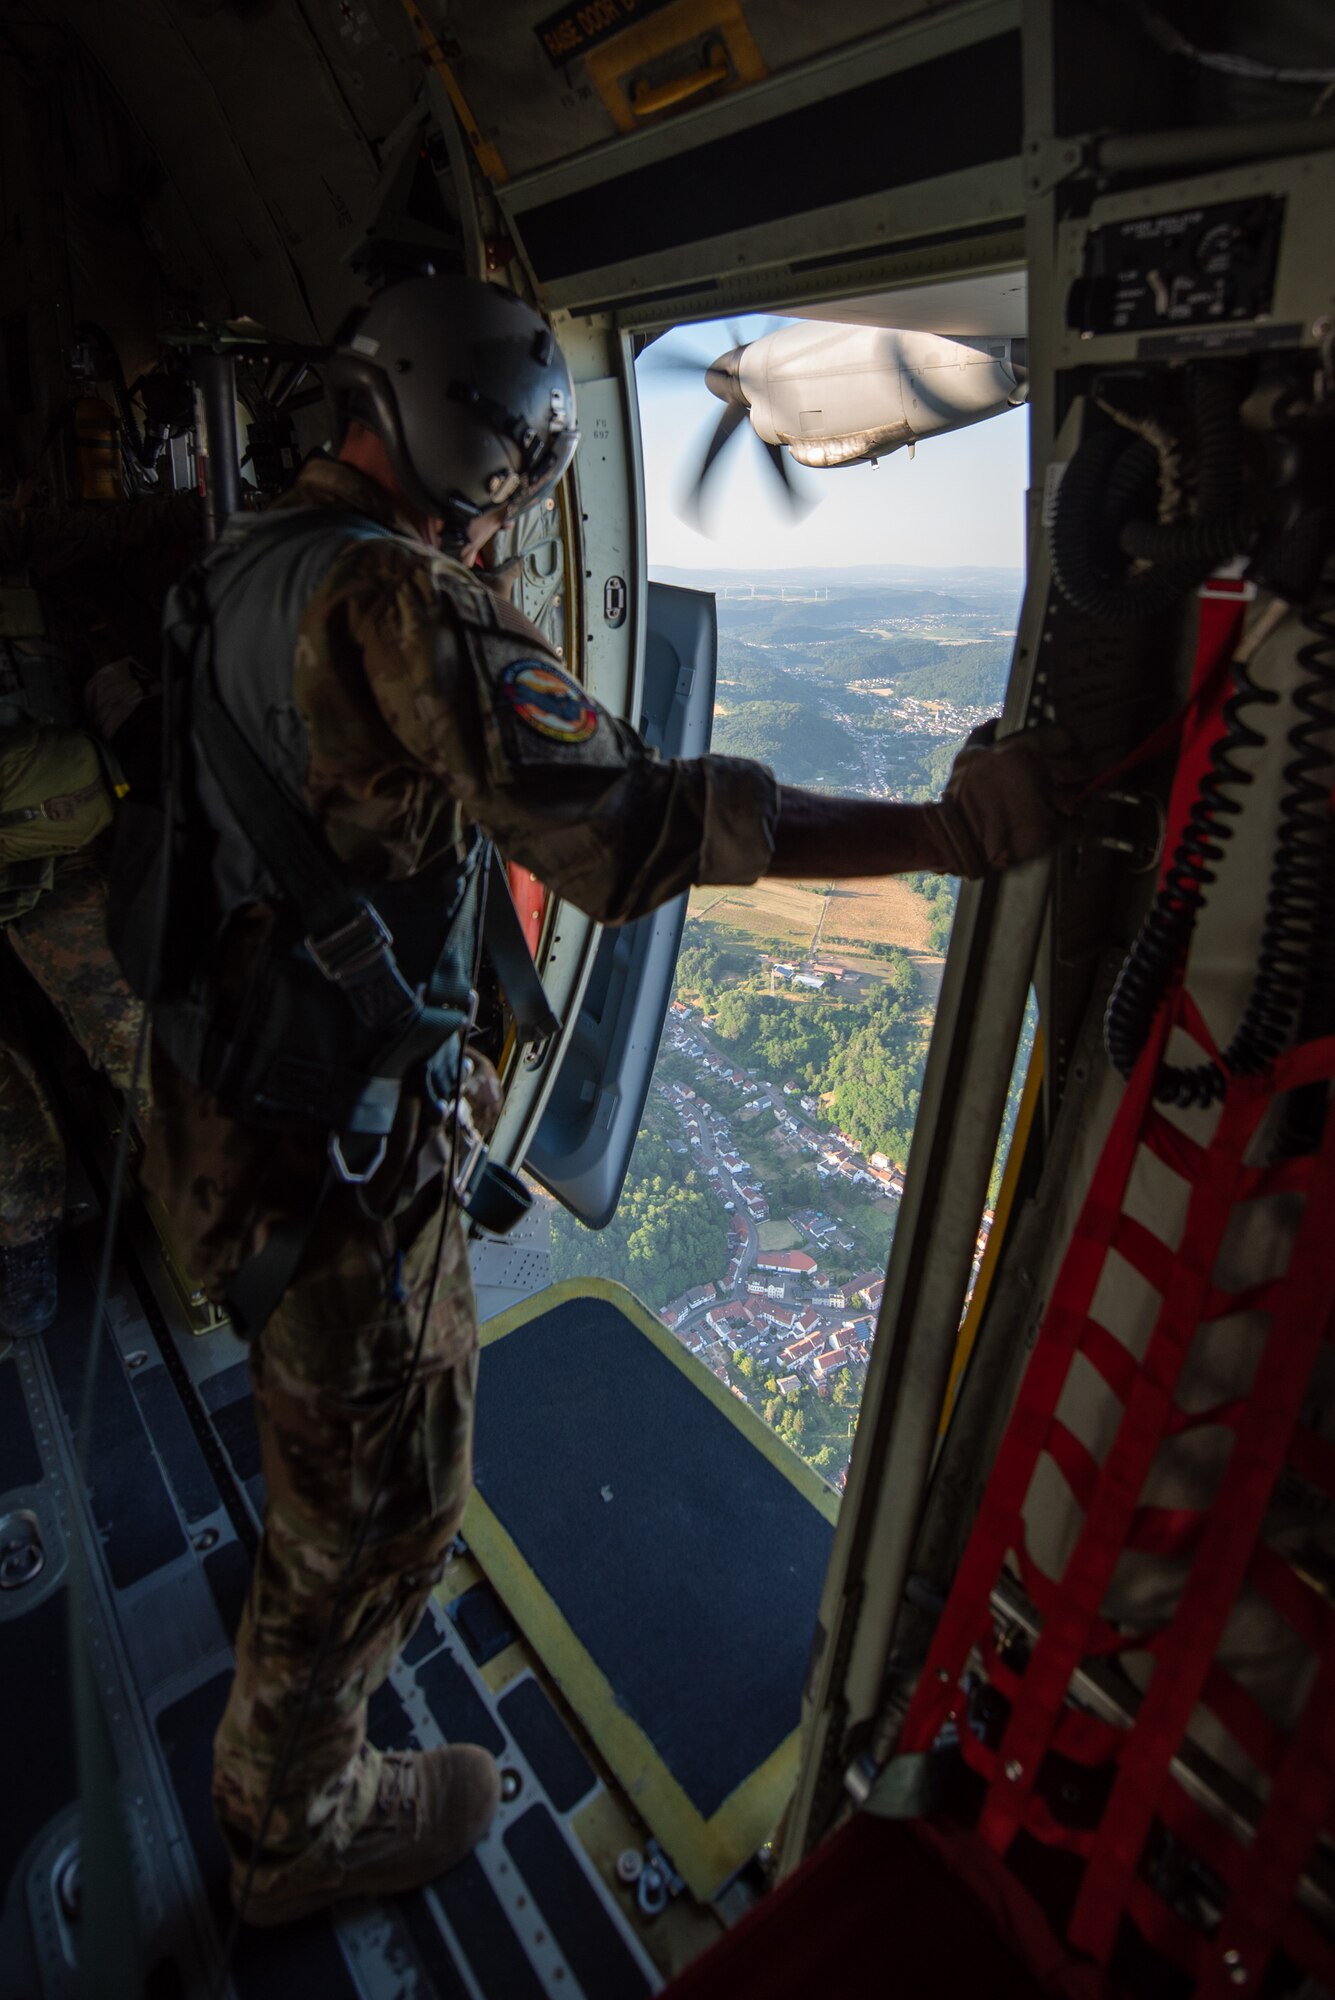 Master Sgt. Chris Kinberger, a loadmaster assigned to the Kentucky Air National Guard’s 165th Airlift Squadron, looks out a paratroop door of a 123rd Airlift Wing C-130J Super Hercules during exercise Air Defender 2023 in Saarbrucken, Germany, June 15, 2023. AD23 integrates both U.S. and allied air-power to defend shared values, while leveraging and strengthening vital partnerships to deter aggression around the world. (U.S. Air National Guard photo by Master Sgt. Phil Speck)